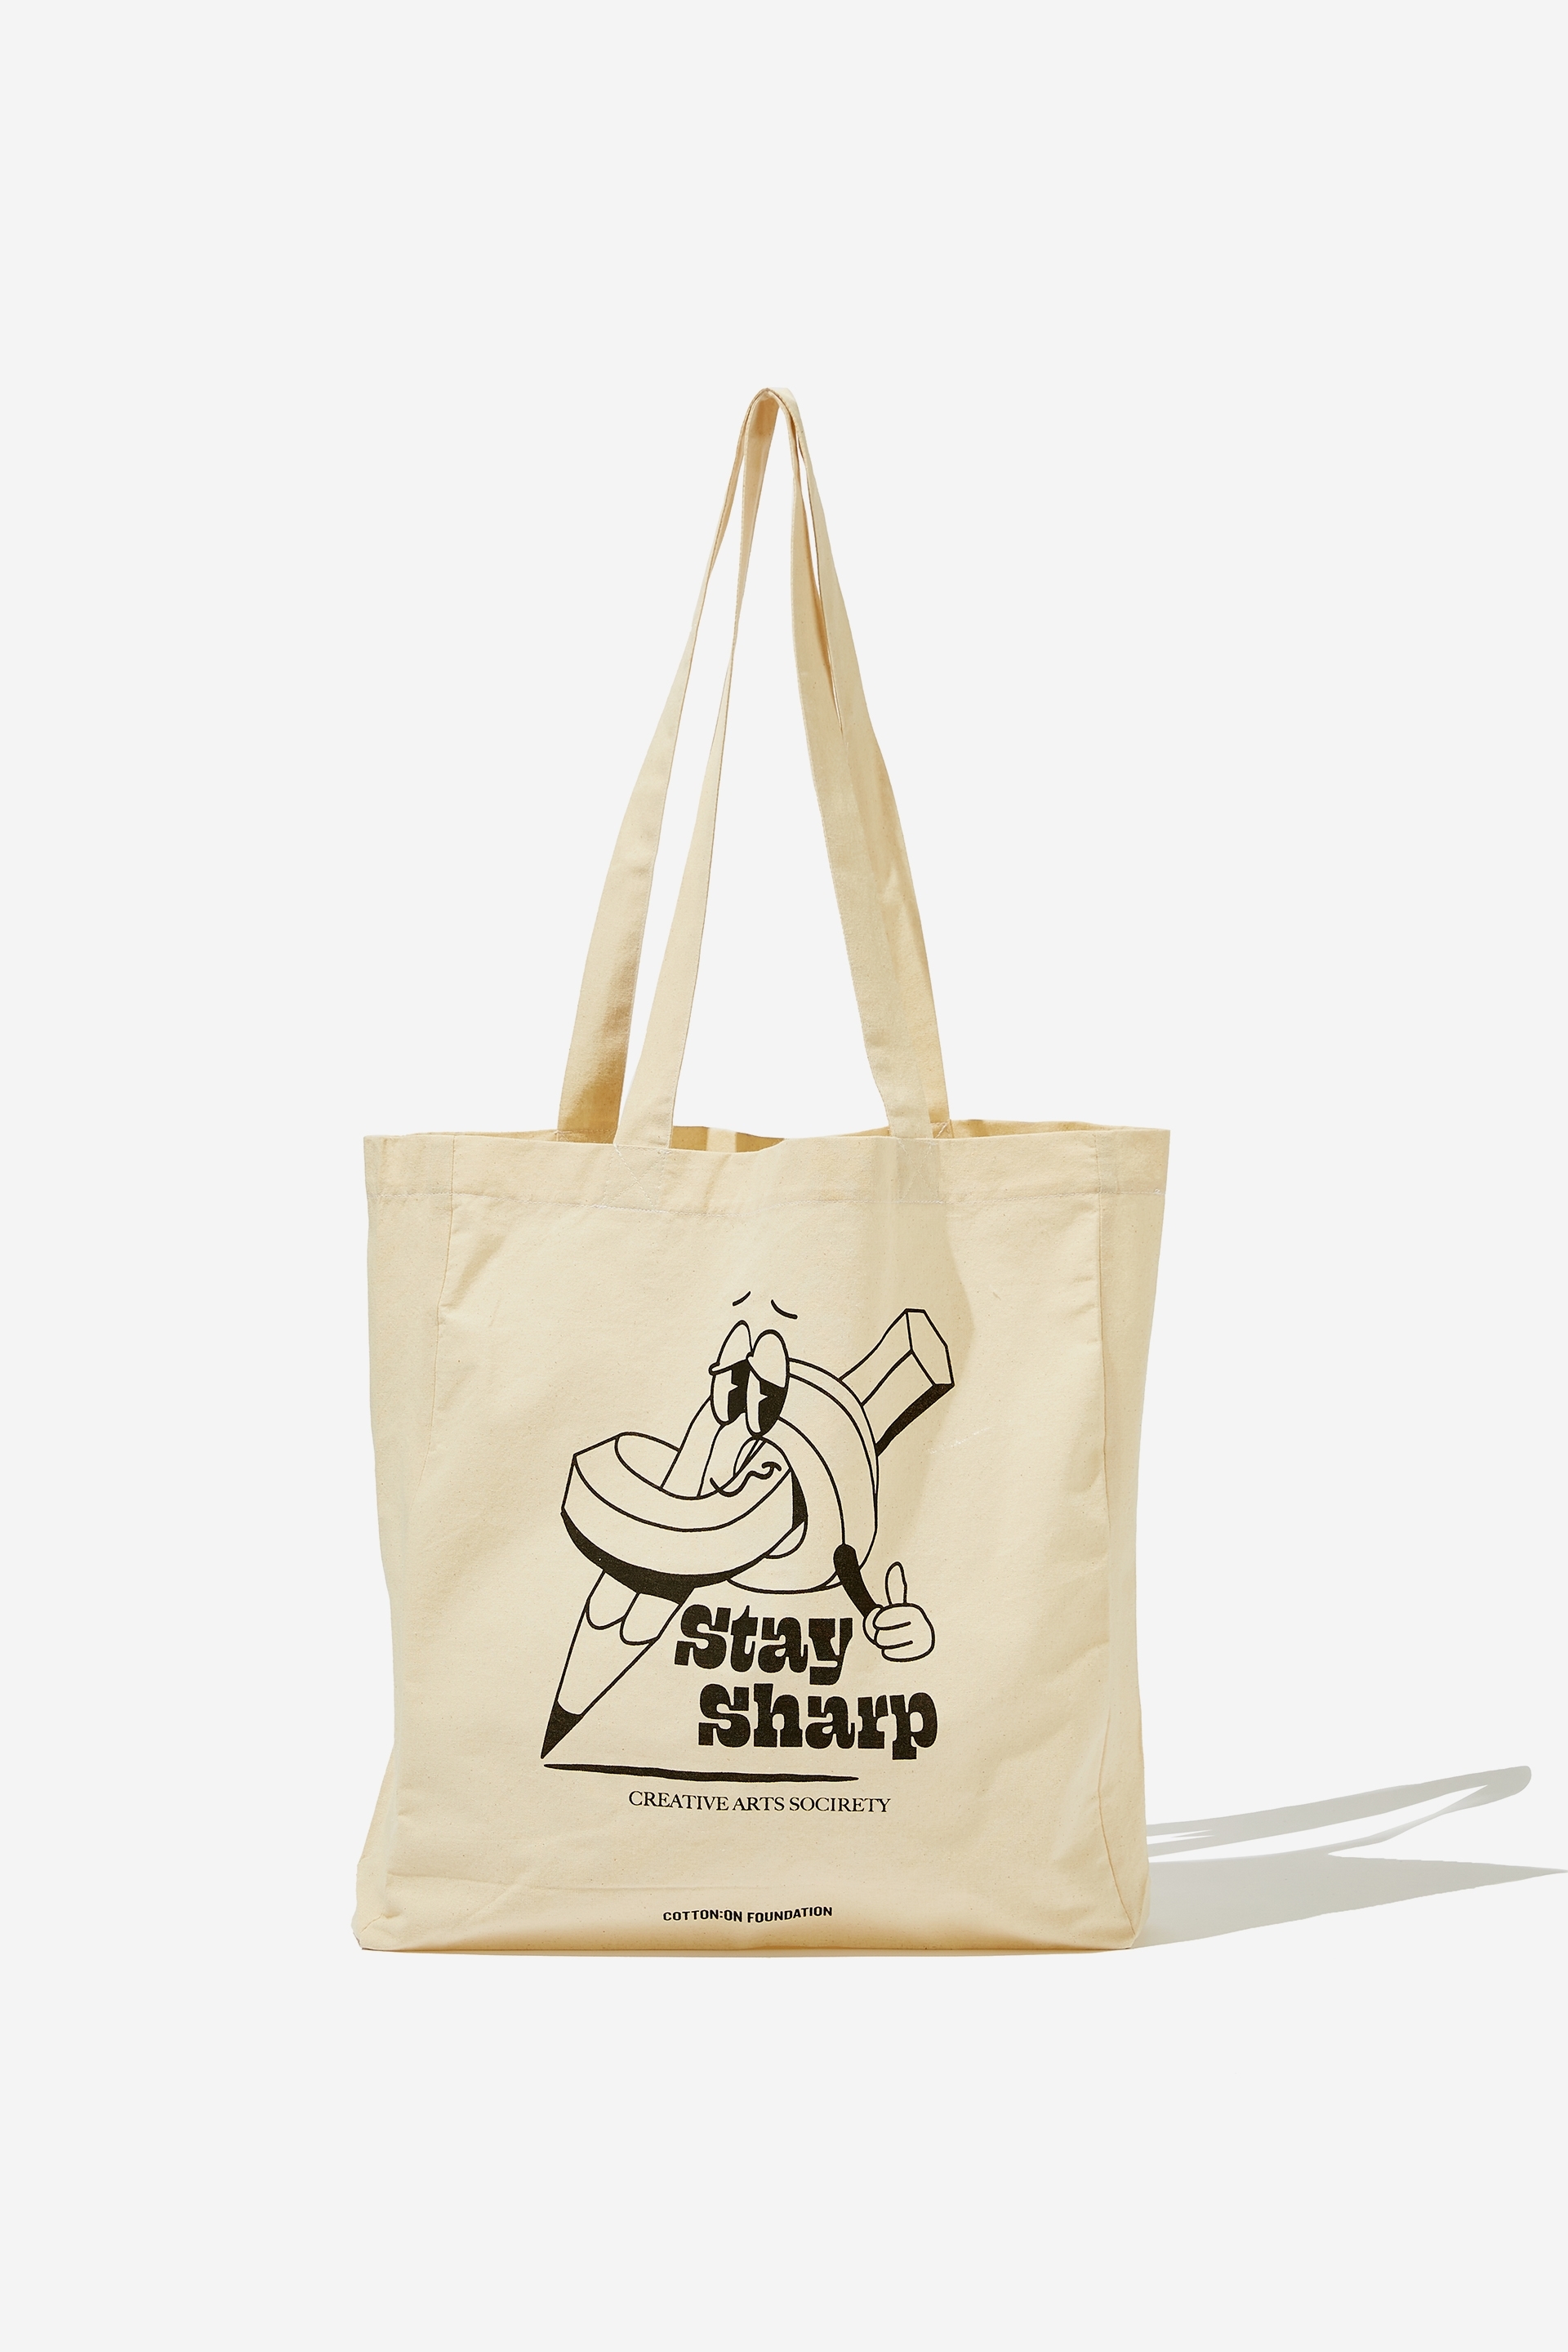 Foundation Typo Recycled Tote Bag